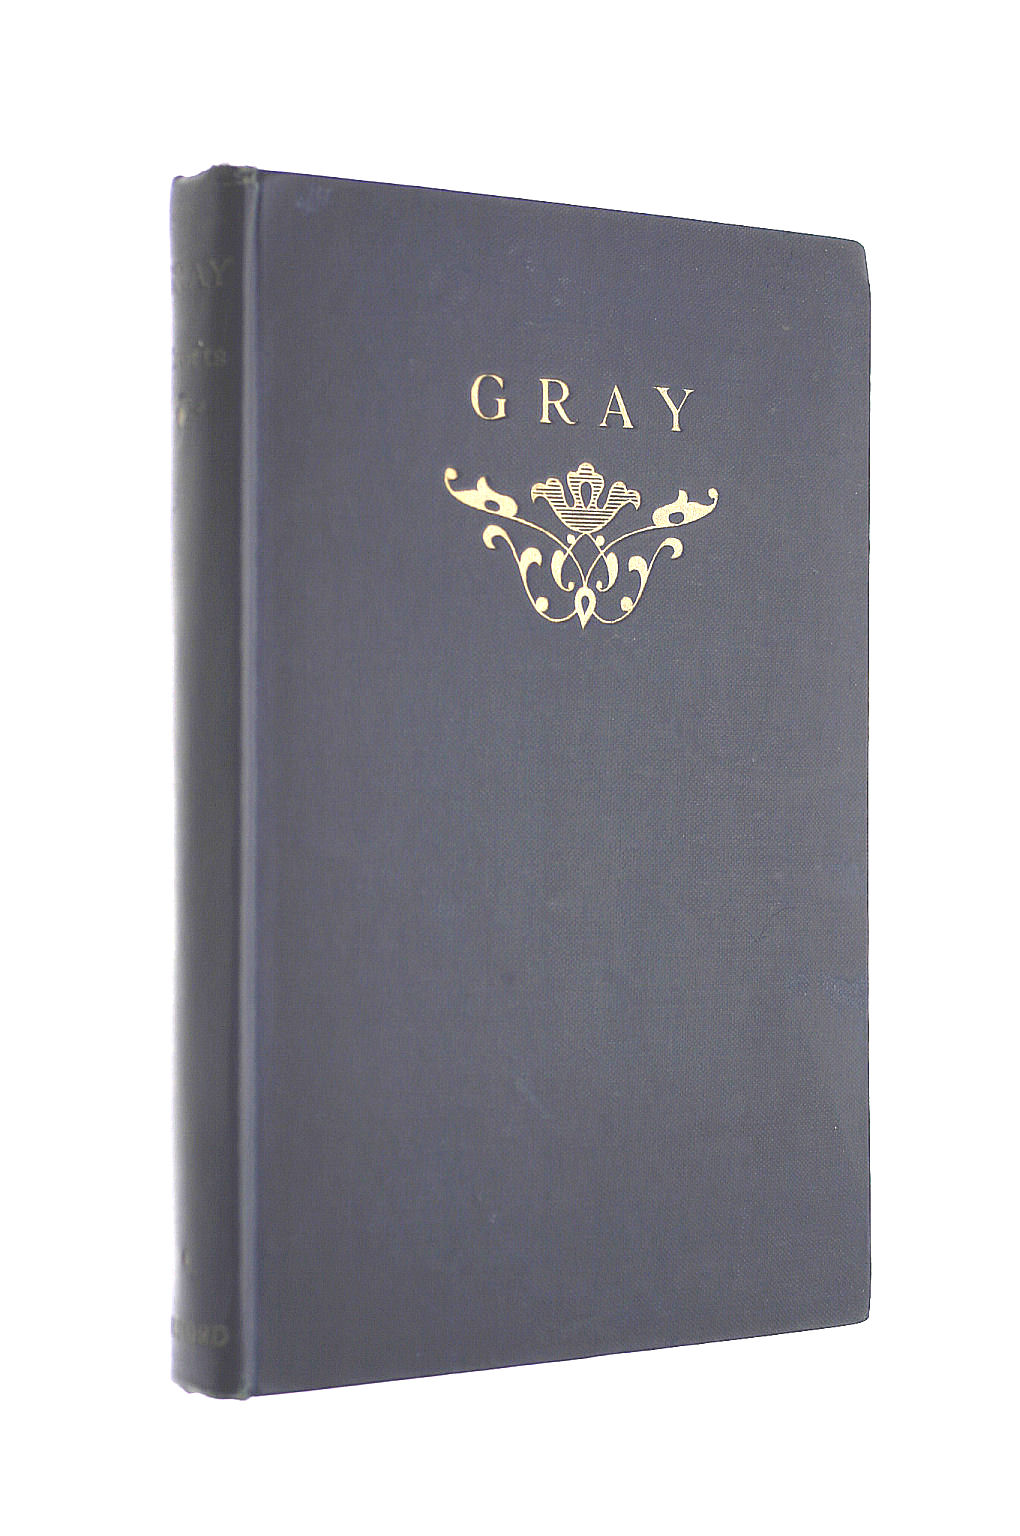 J CROFTS [EDITOR] - Gray Poetry & Prose, with Essays By Johnson, Goldsmith and Others